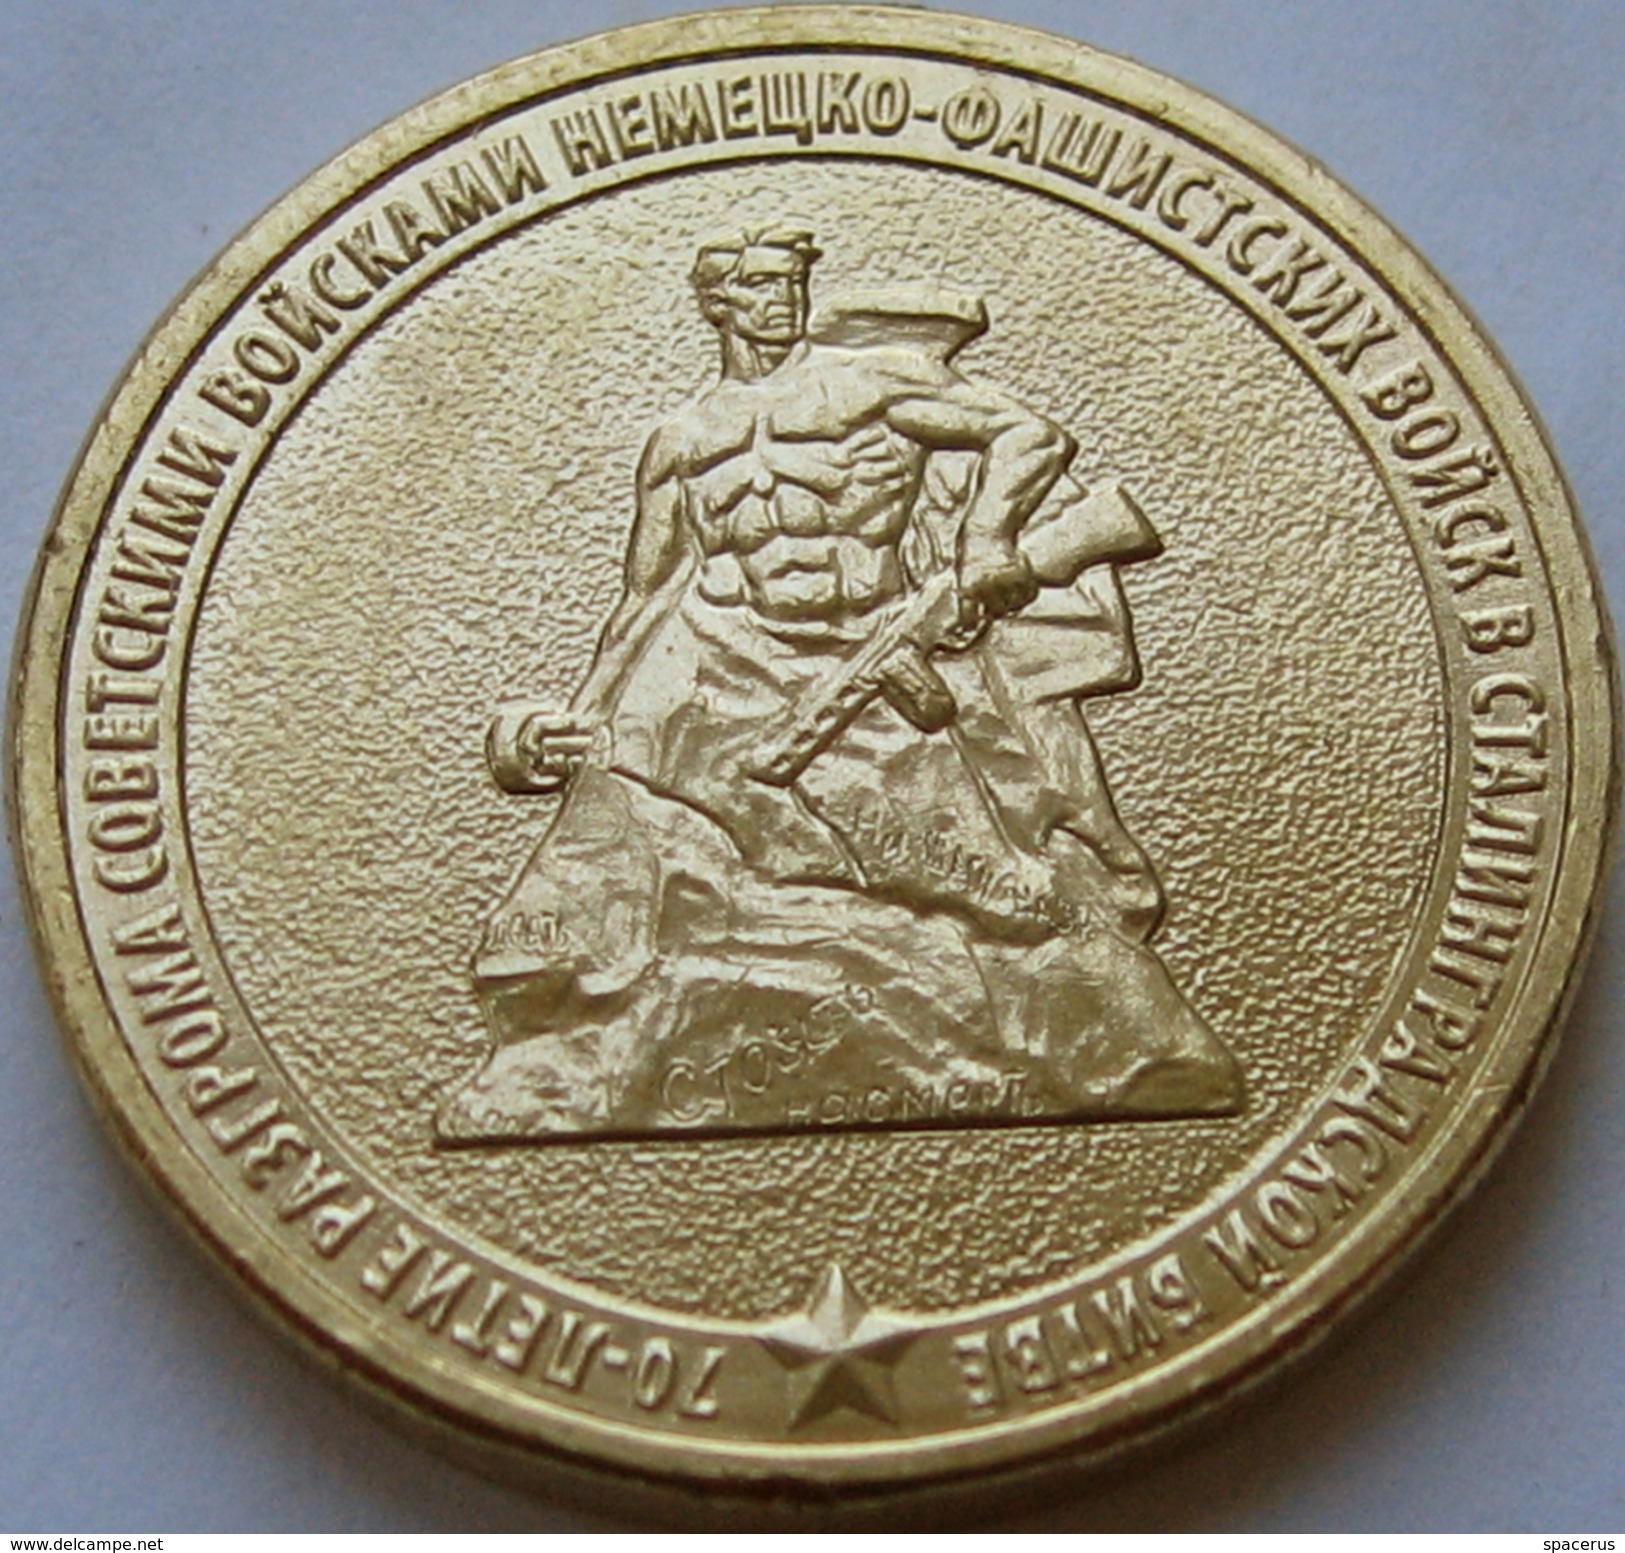 4 RUSSIA Coin 2013 10 ROUBLES Stalingrad Battle 70 Anniversary  (1 Coin) - Rusland